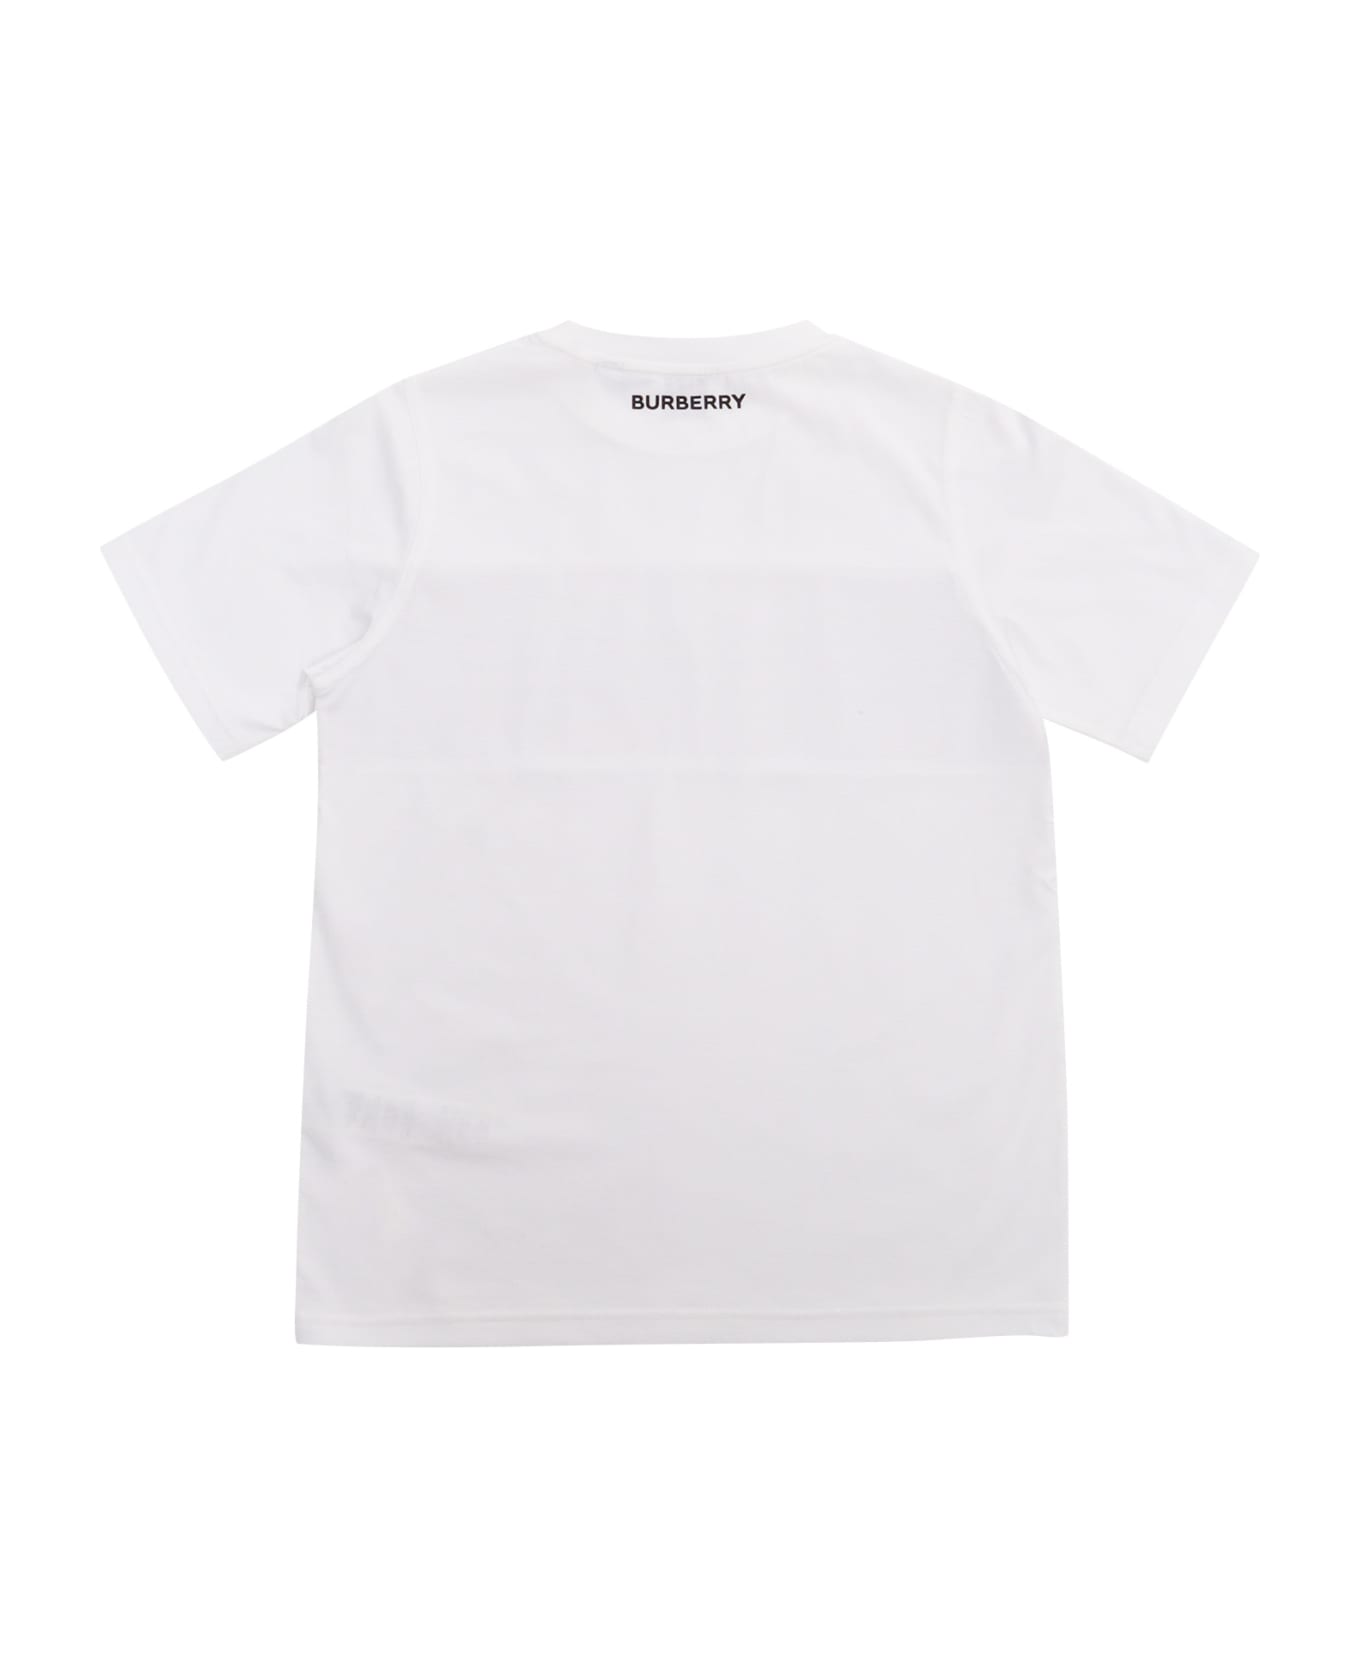 Burberry White T-short With Print - WHITE Tシャツ＆ポロシャツ